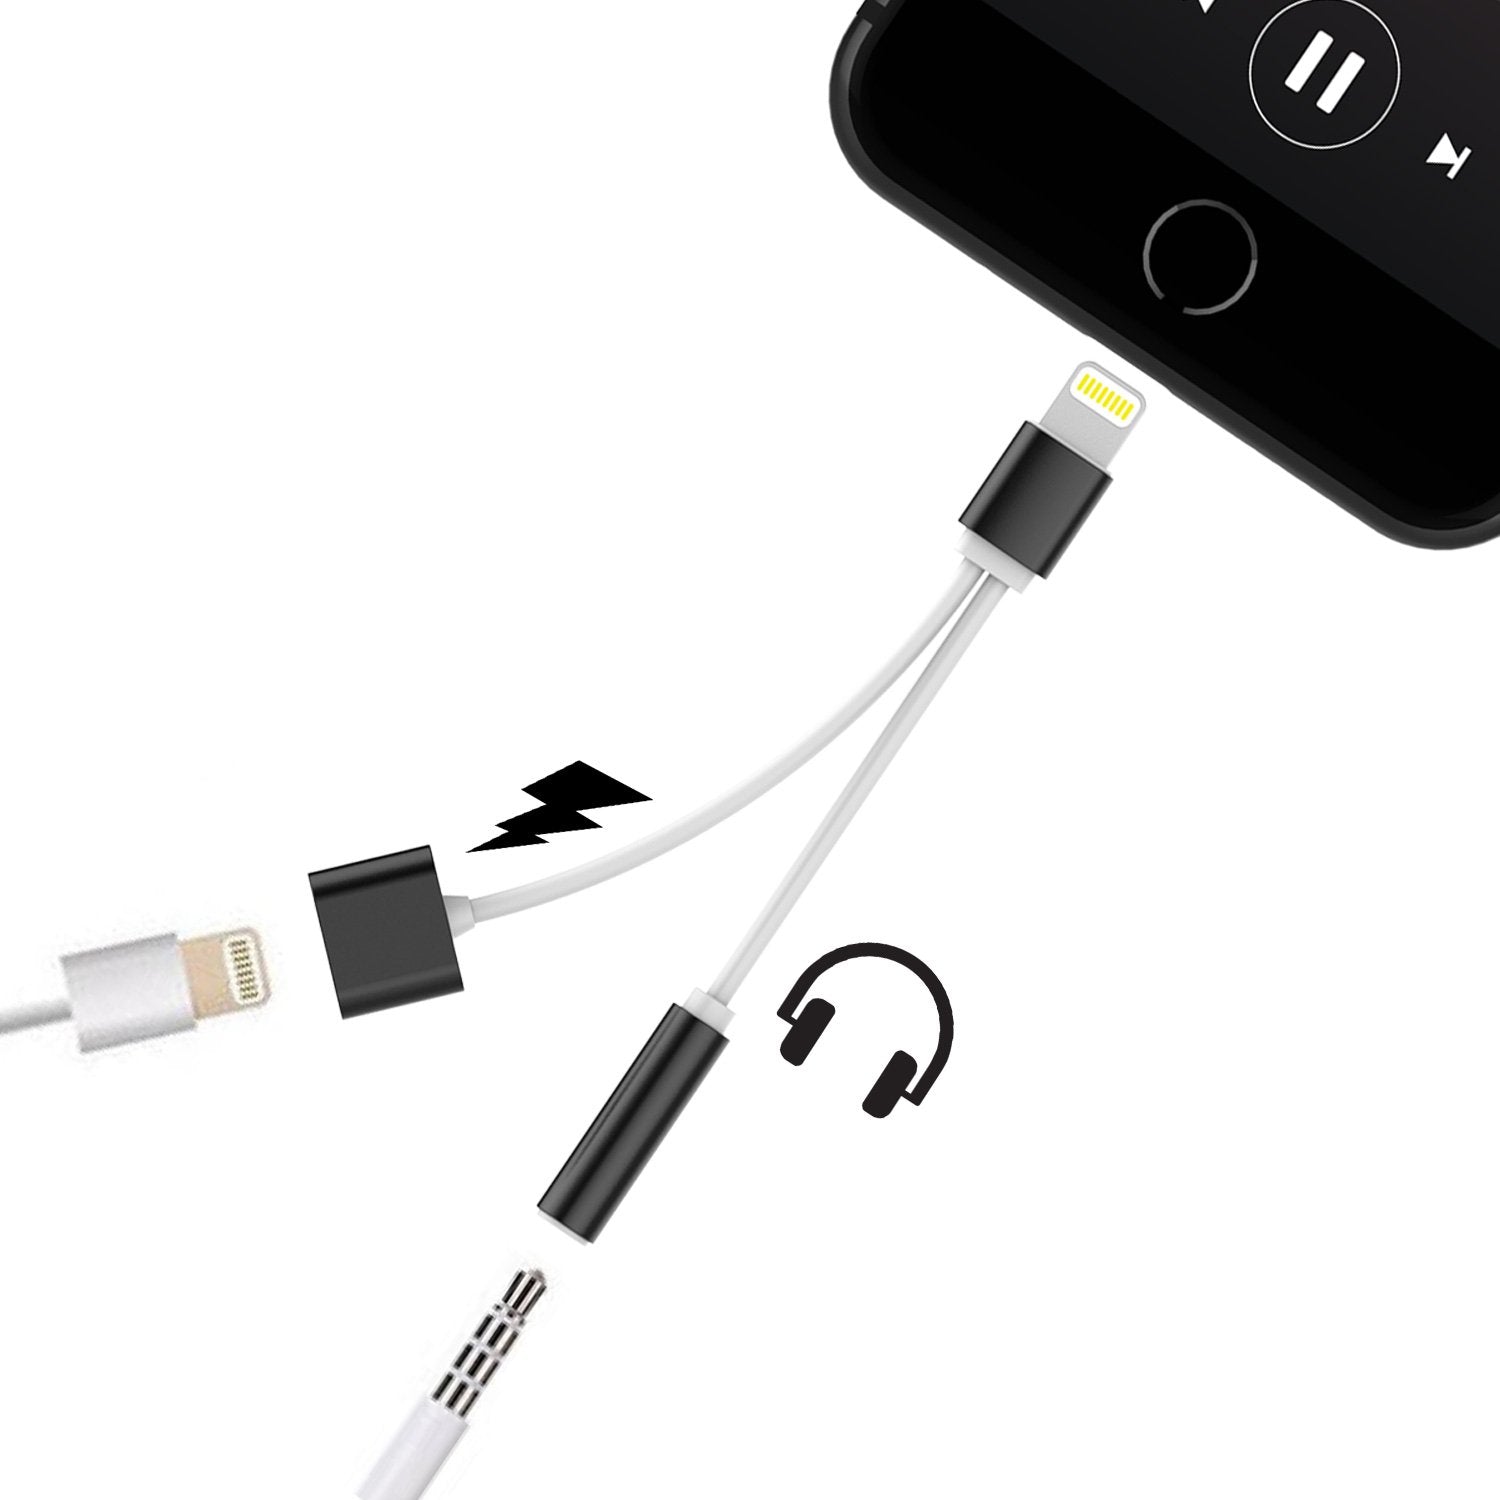 PUNKZAP Lightning Adapter Cable 2 in 1 Splitter Charger with 3.5mm Earphone AUX Jack|Charge & Listen to your Apple iPhone [BLACK] - PunkCase NZ